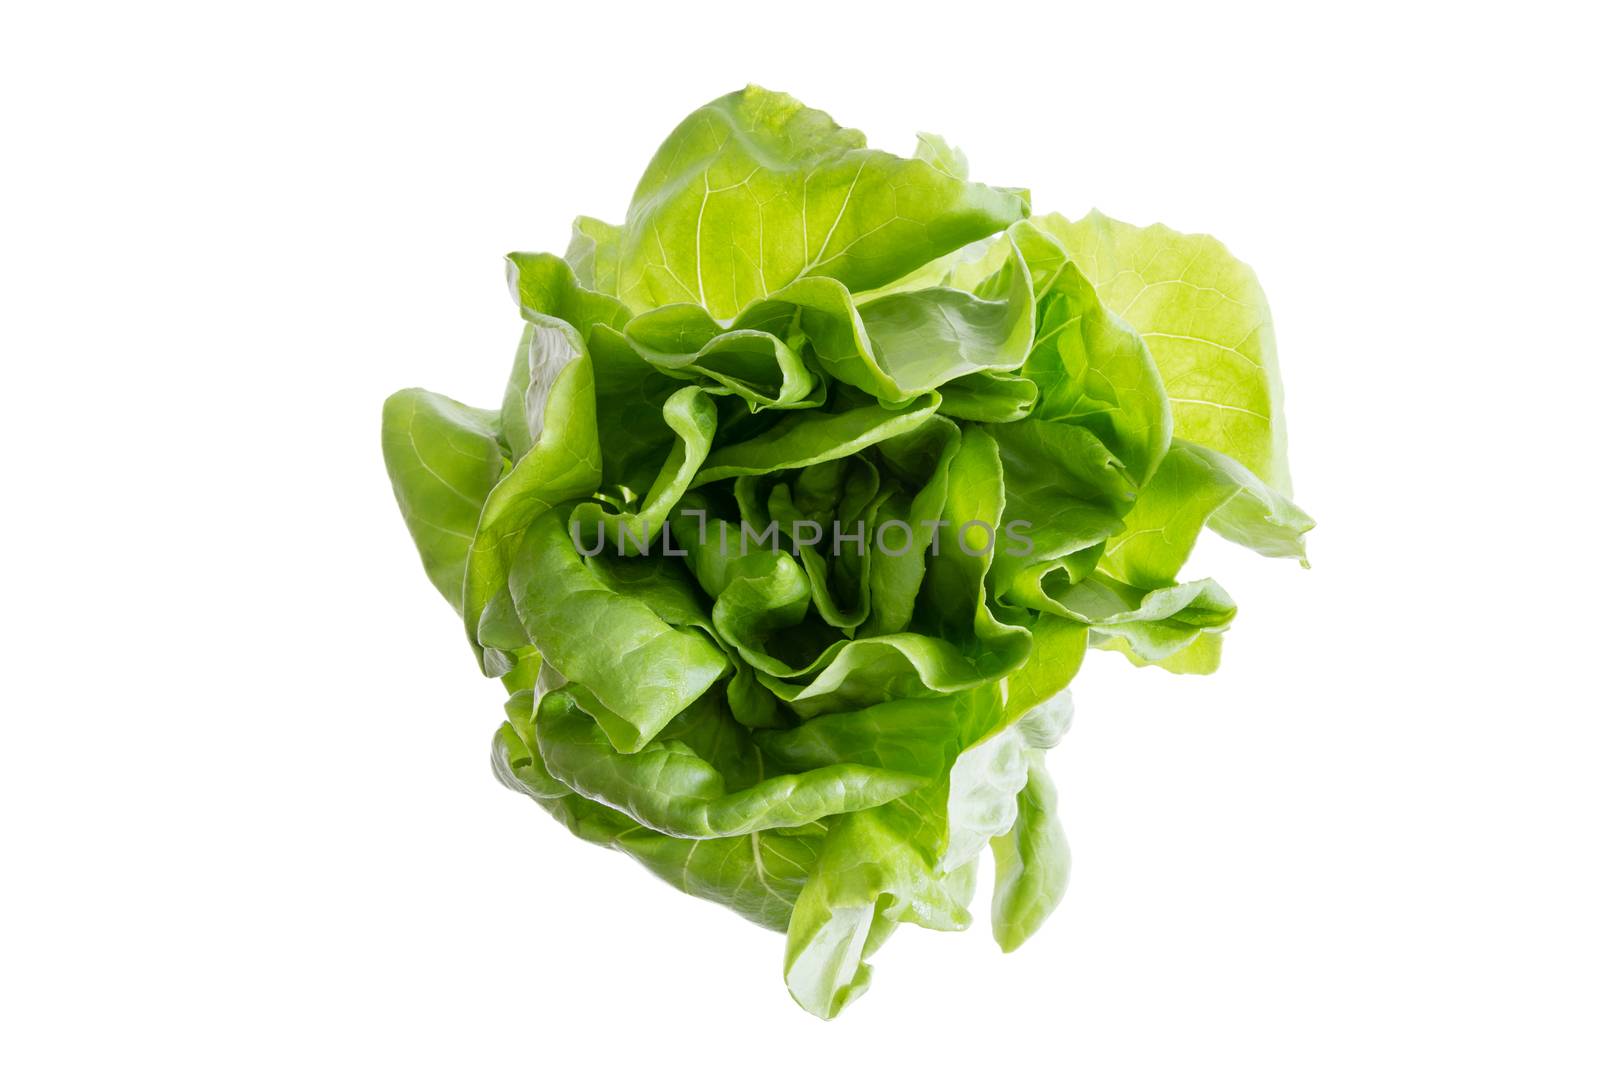 Head of fresh organic butter crunch lettuce grown locally, sustainable no GMO farm produce for a healthy lifestyle, isolated on white